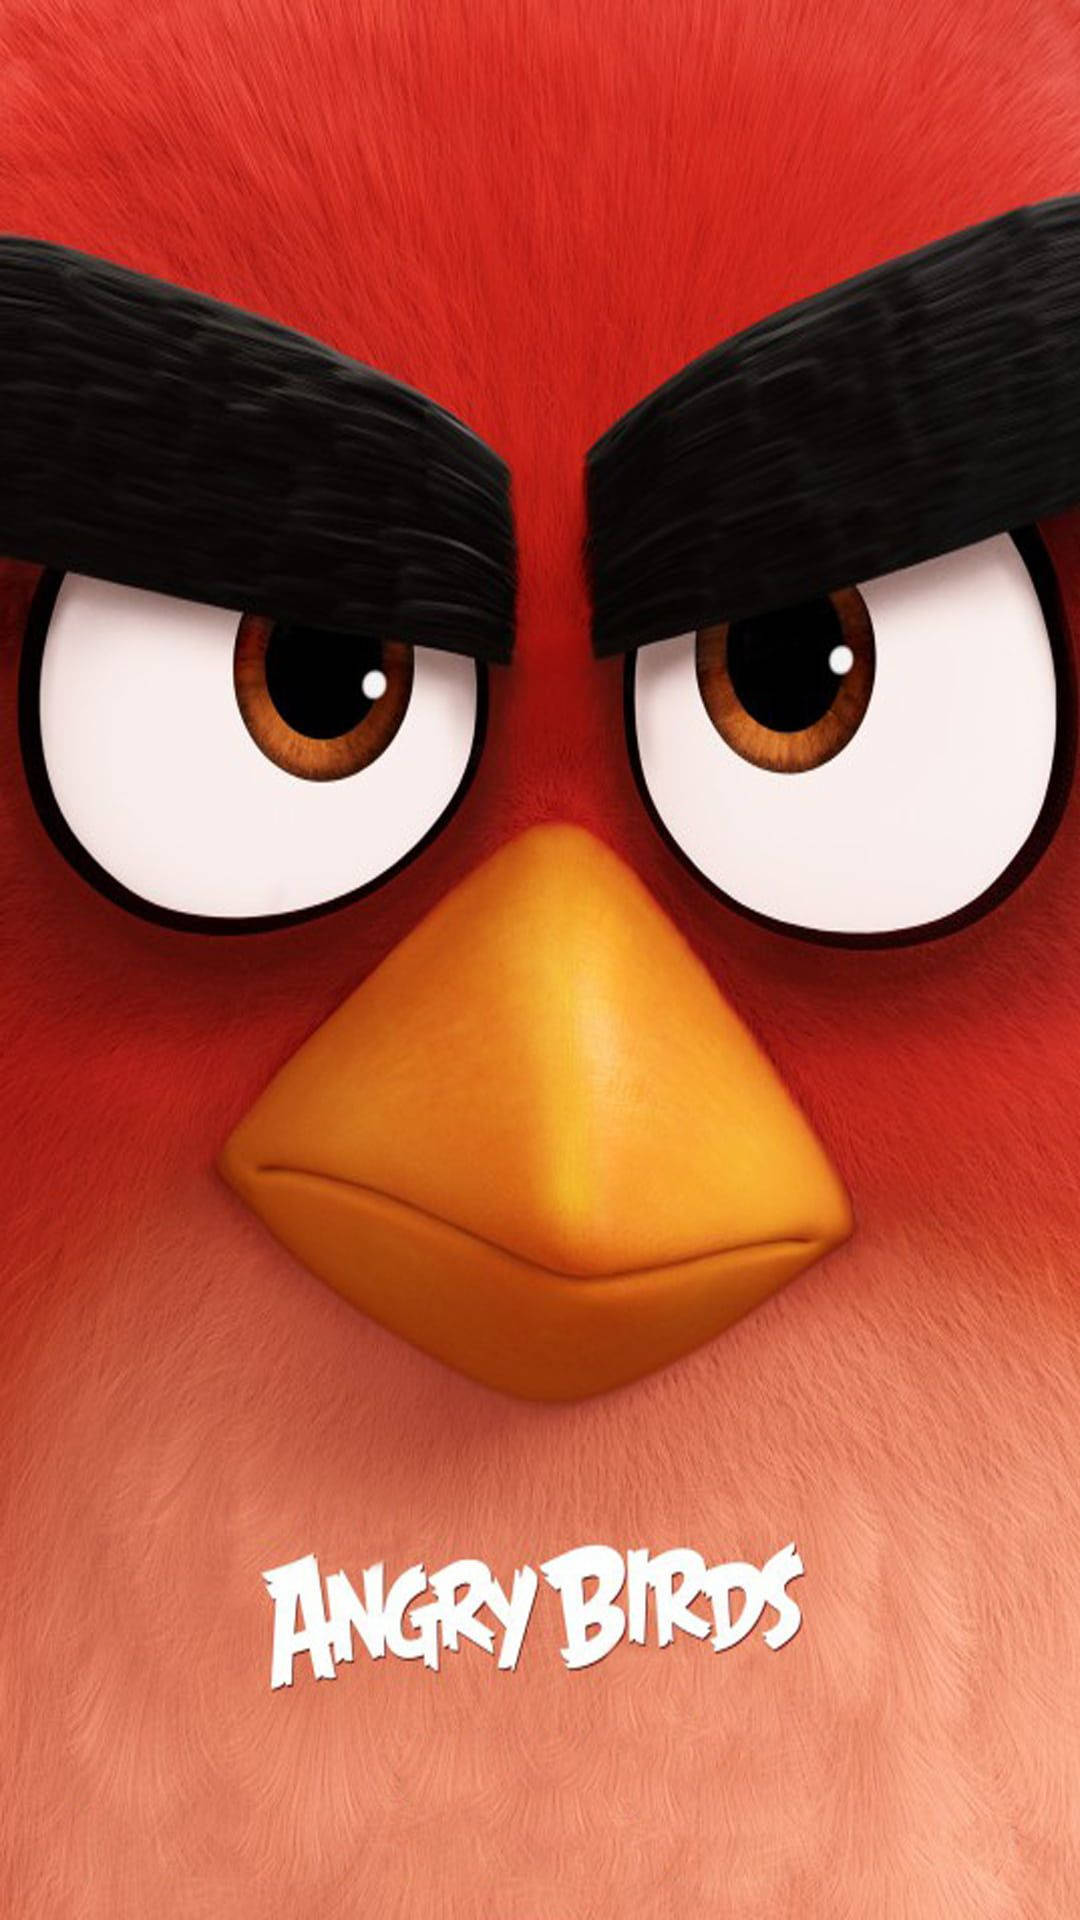 The Angry Birds Movie Poster Featuring Red Wallpaper